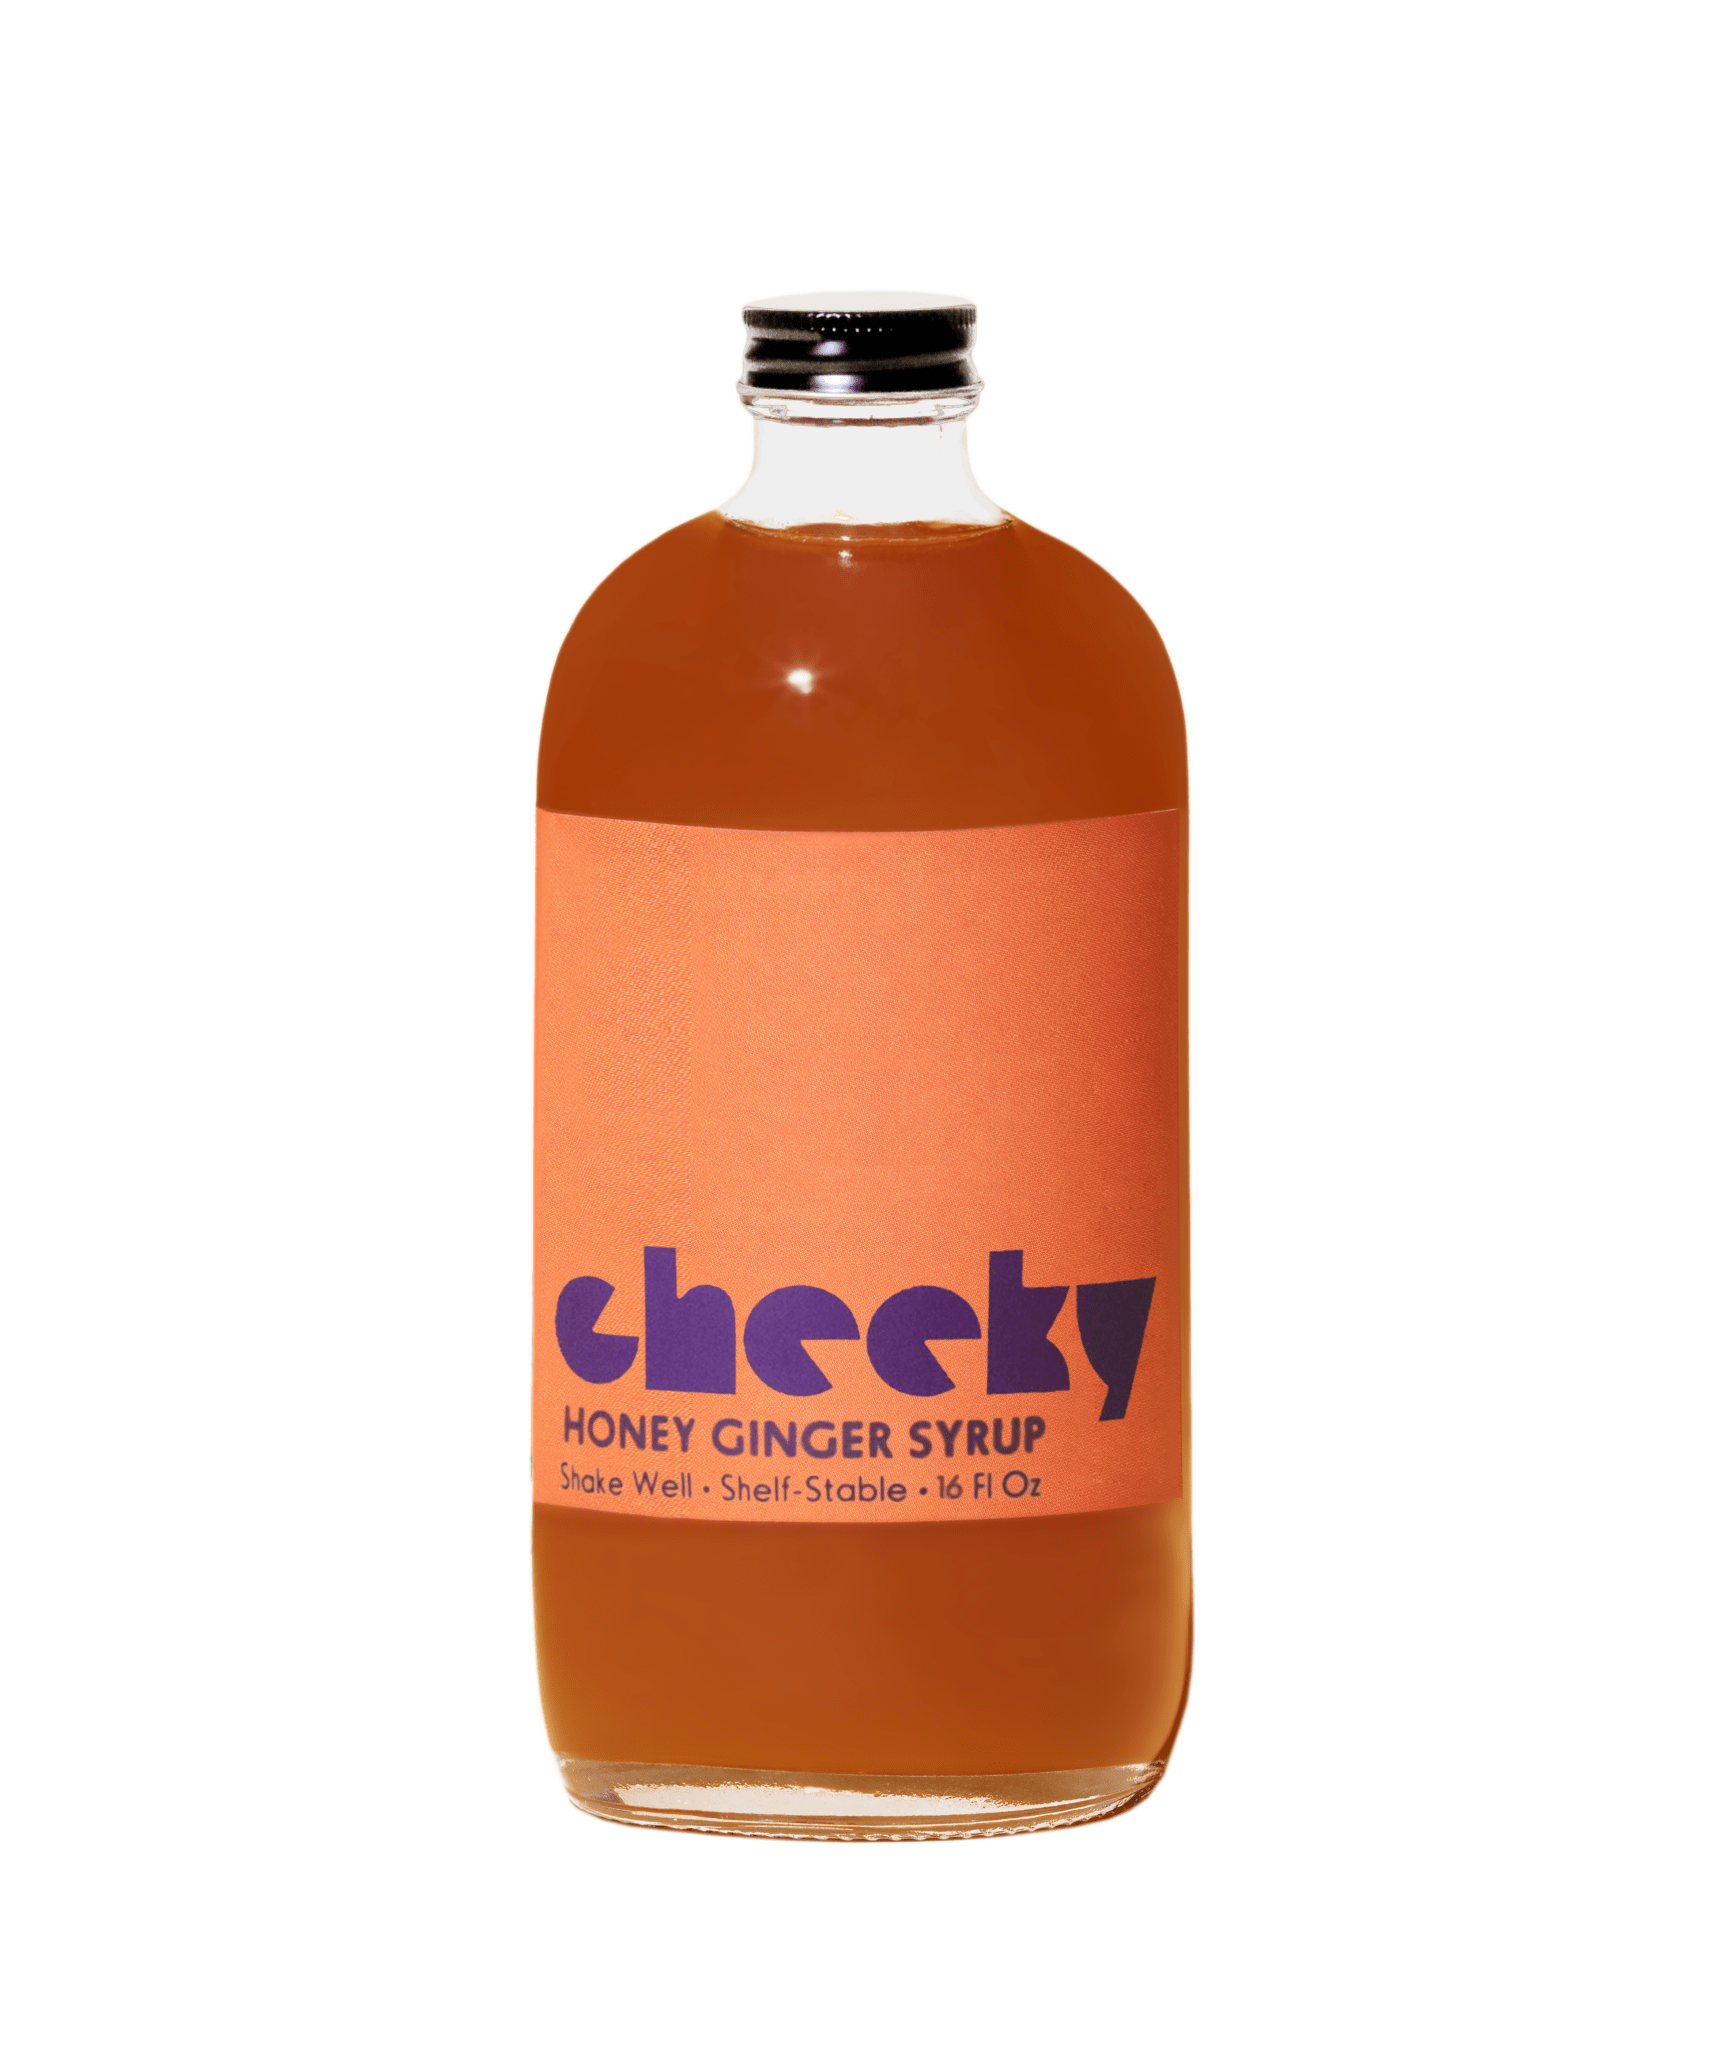 Cheeky Cocktails - Honey Ginger Syrup 16 oz - Boisson